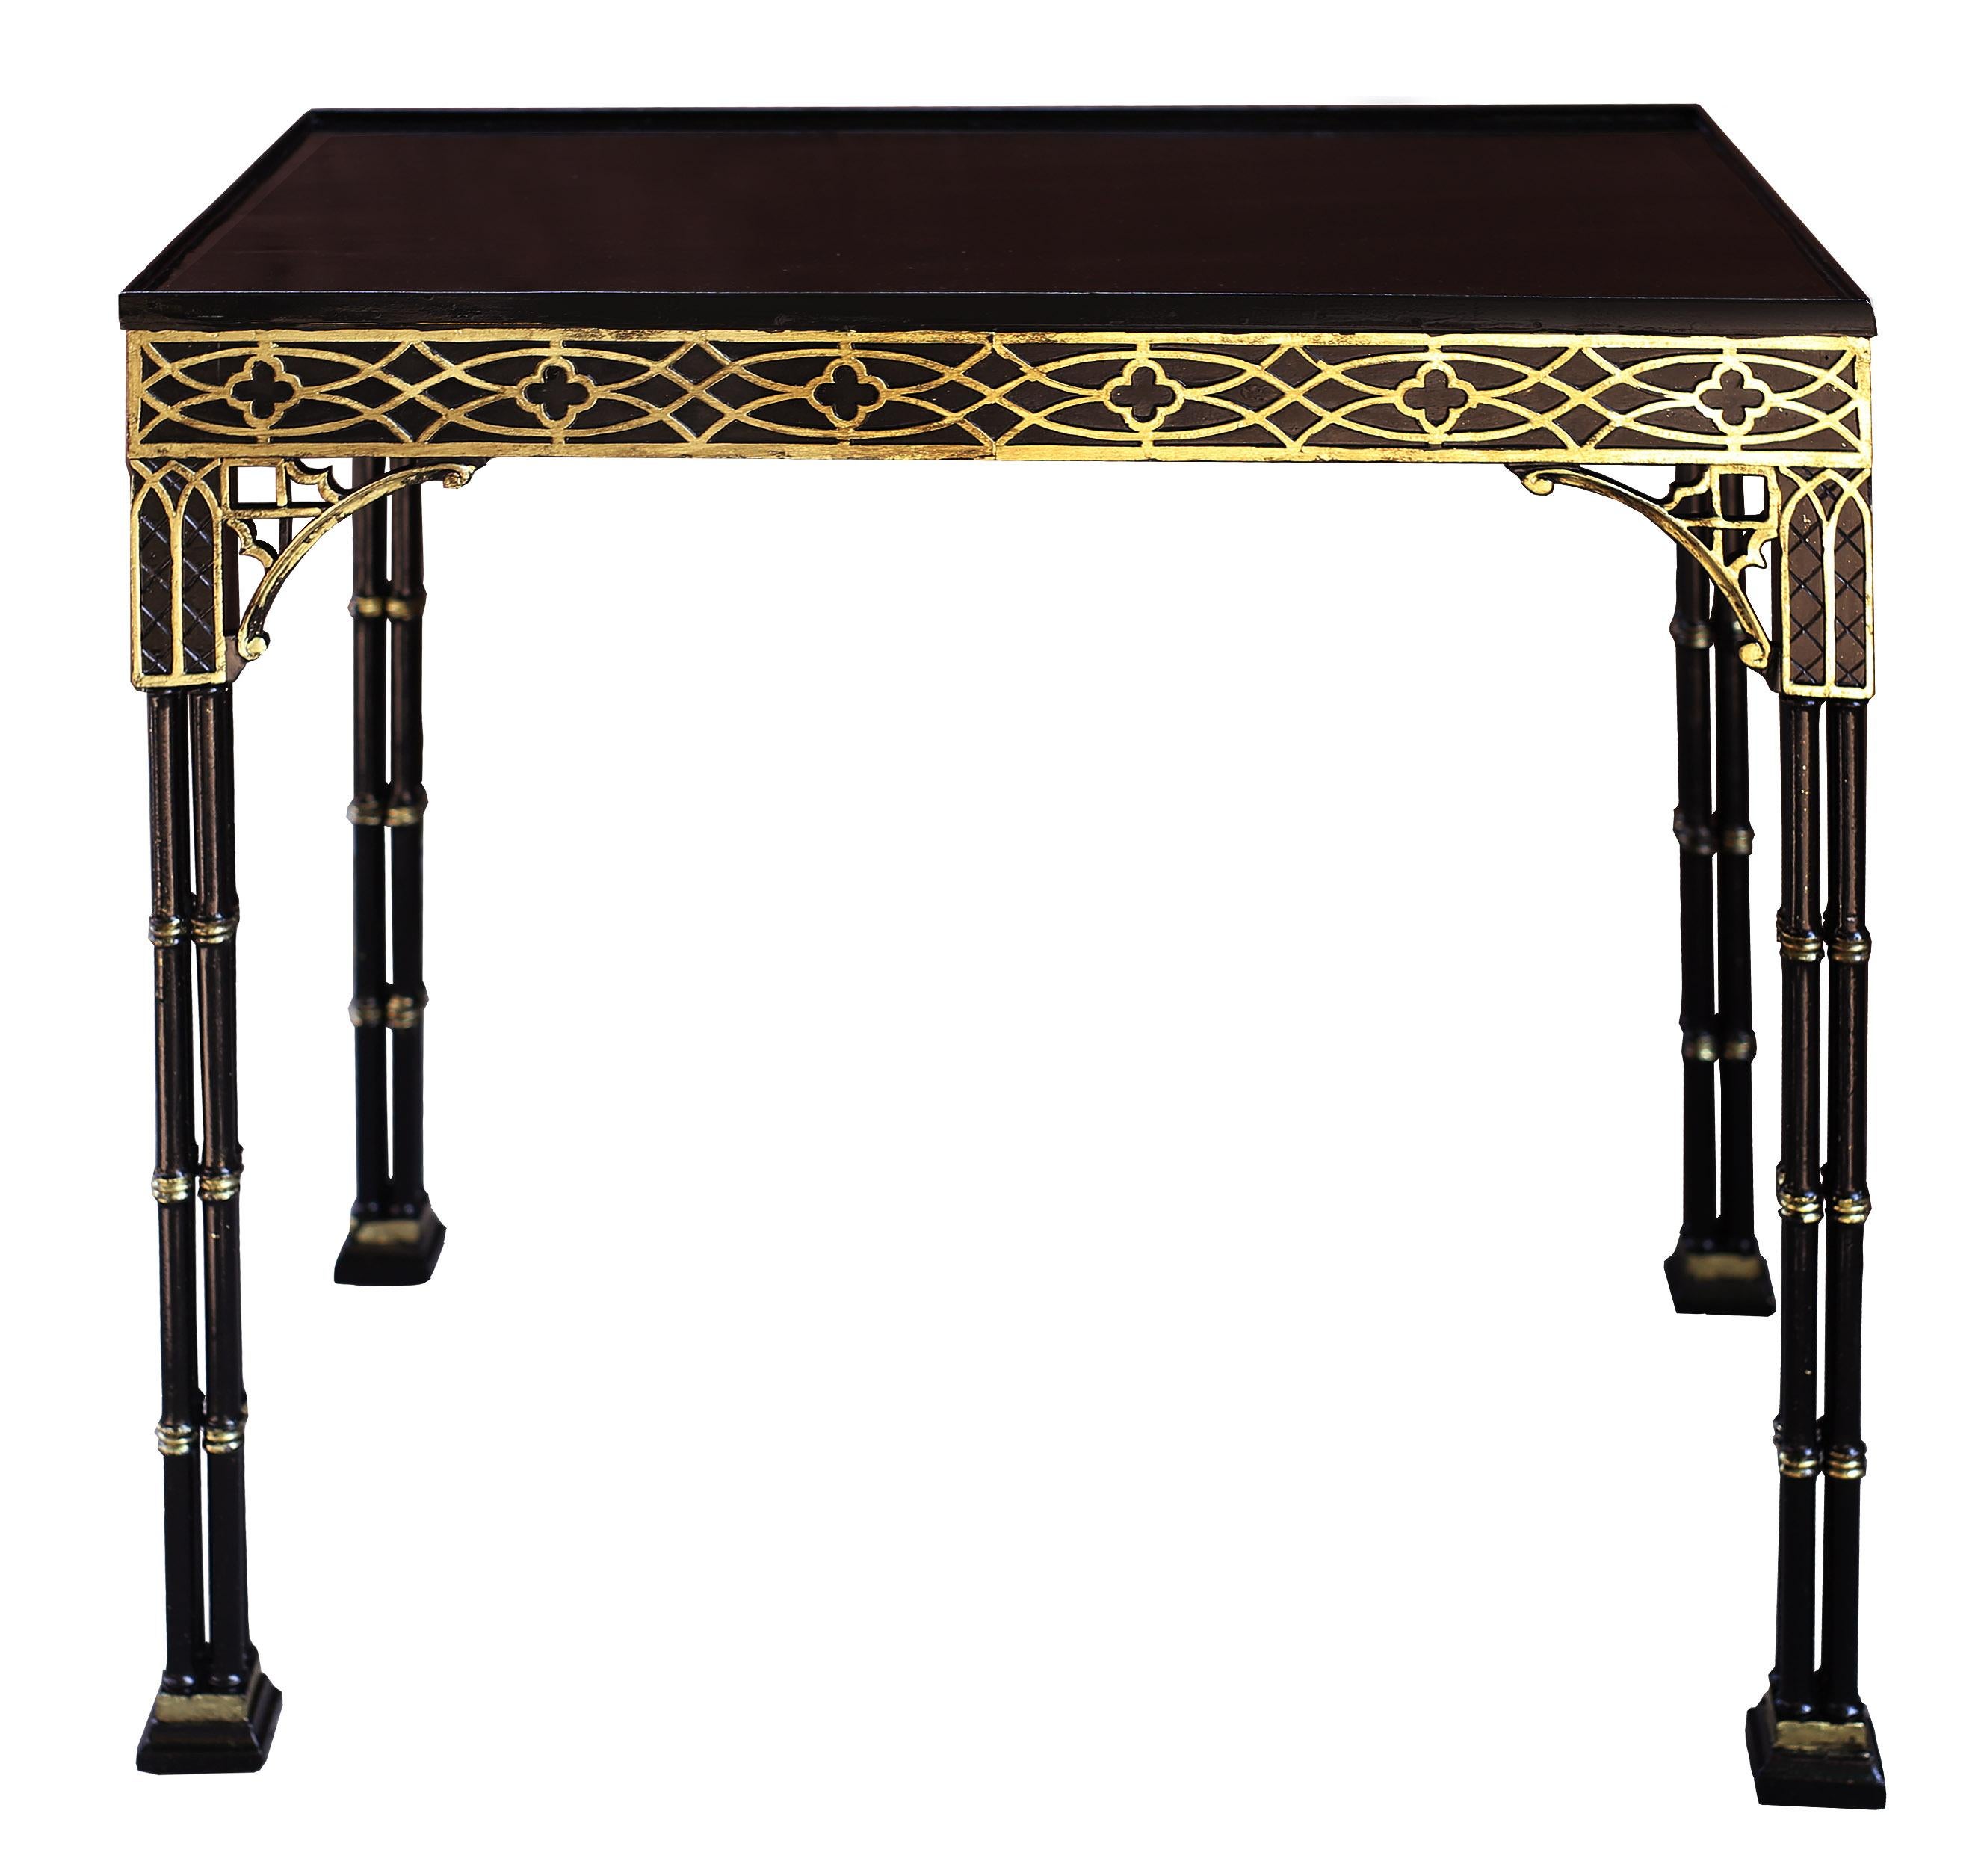 A lovely side or card table of delicate detail and proportion. The frieze of the table features Gothic blind fretwork that is highlighted in 18k gold. The corners are supported by brackets with C-scrolls and lancet arches beneath which extend